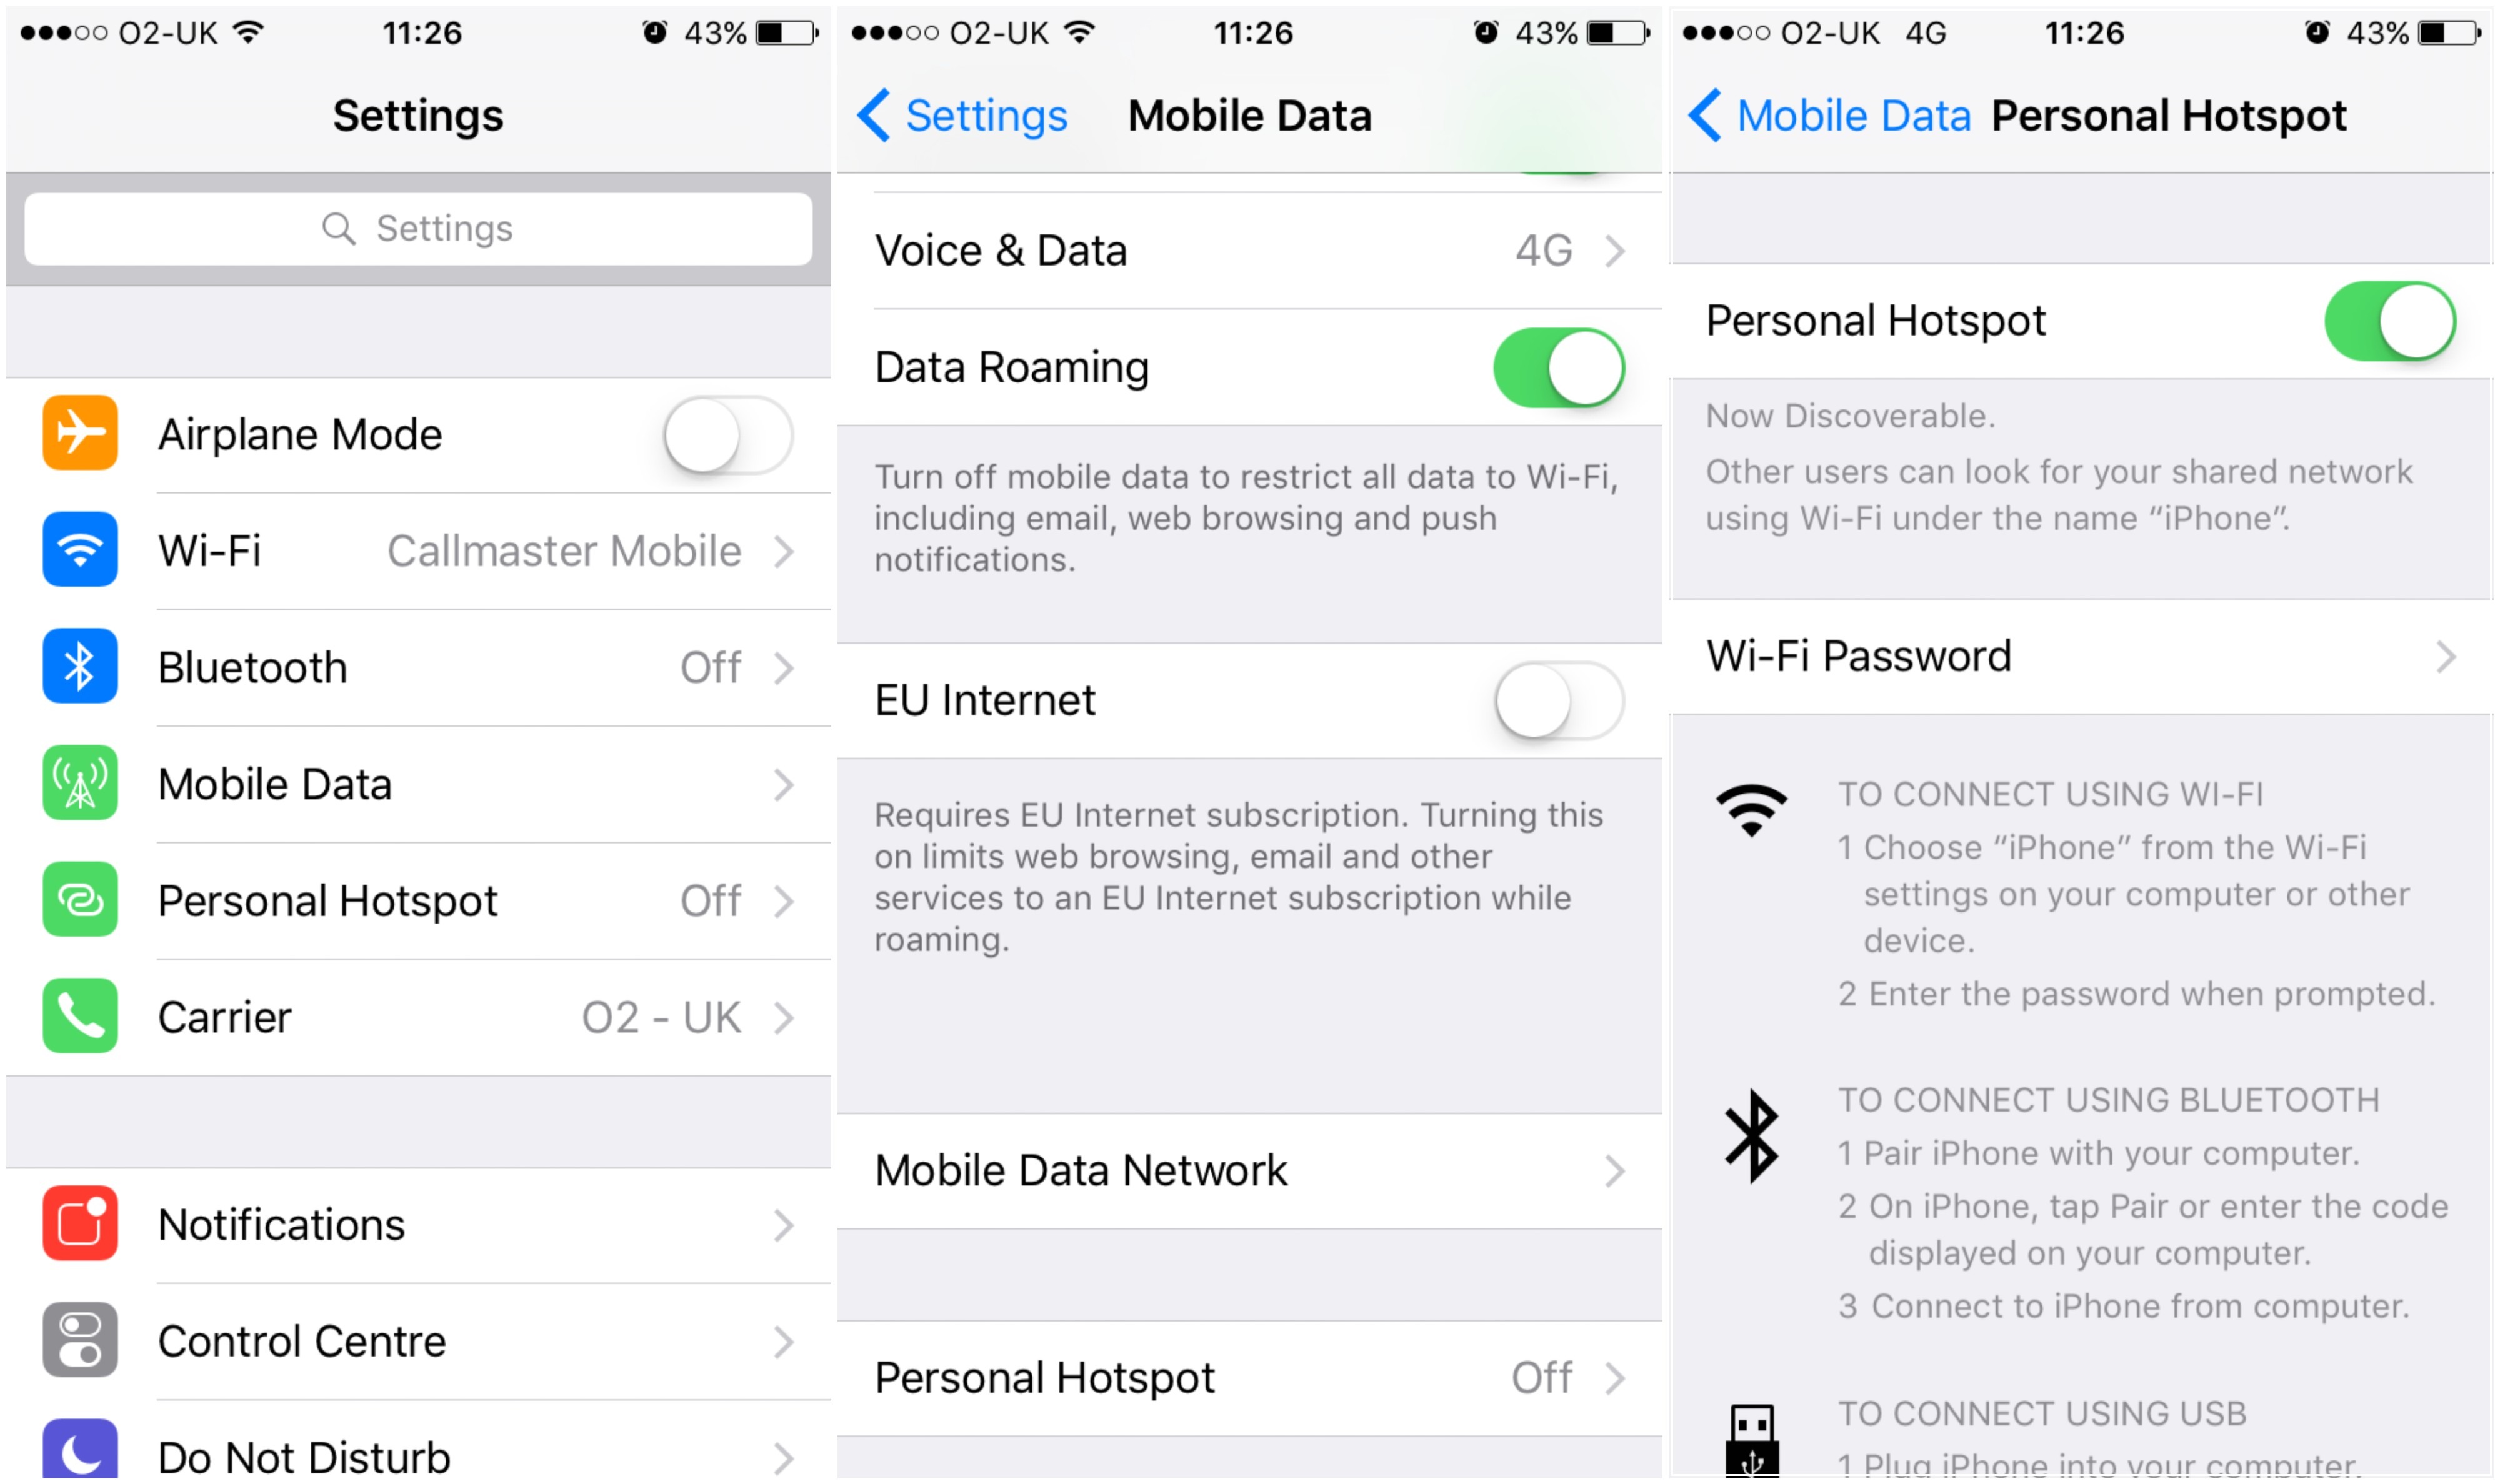 How to use Apple's Personal Hotspot